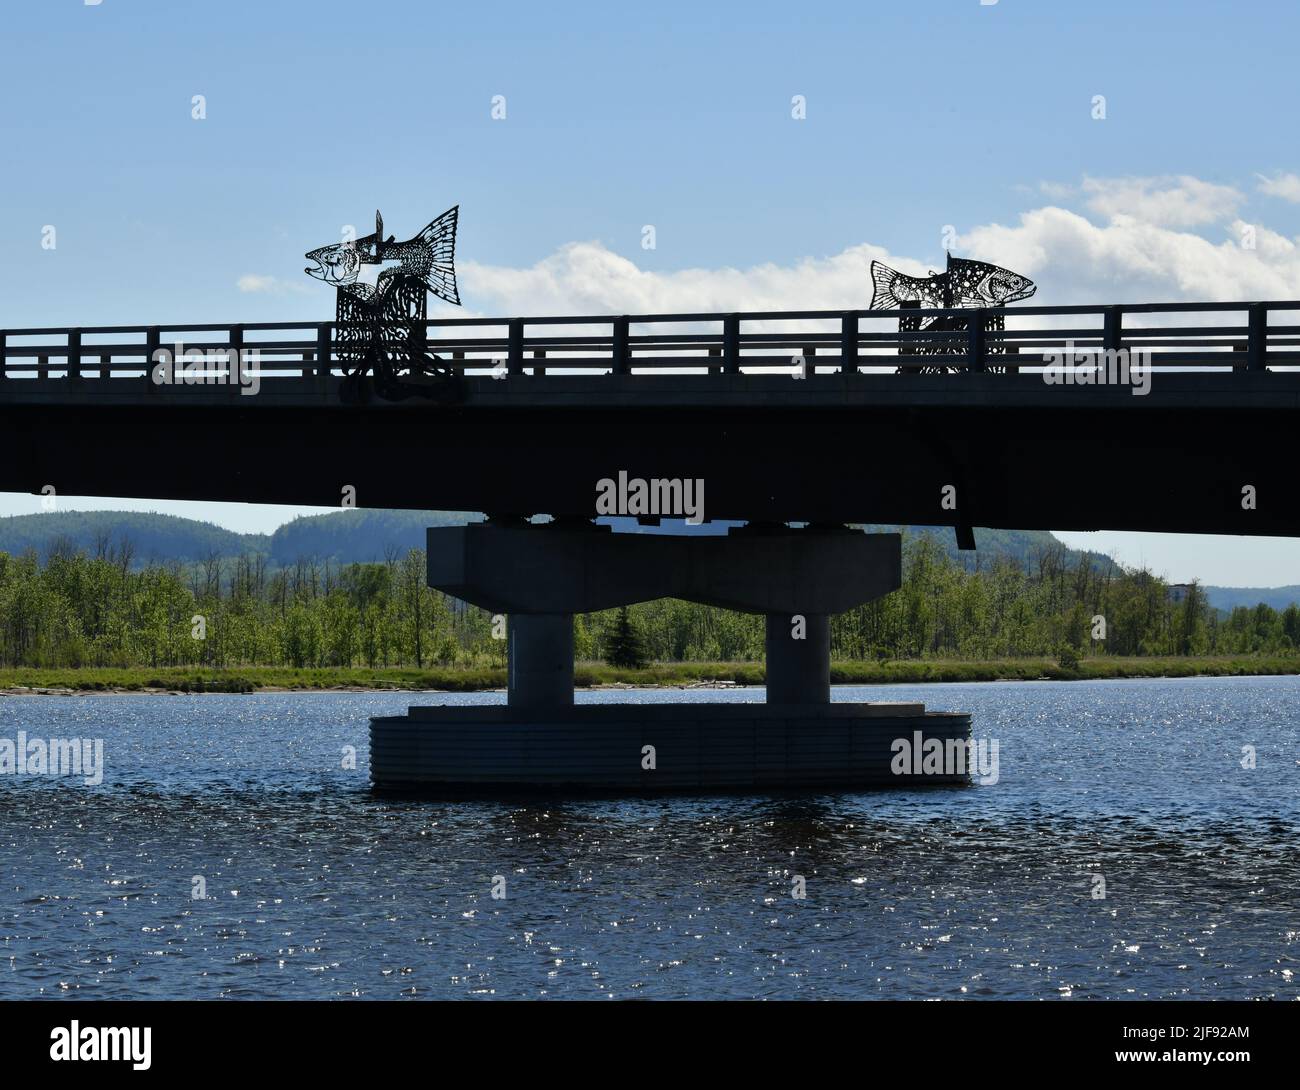 A bridge with iron artwork spans a river in Thunder Bay, Ontario, Canada, while green hills in the background. Stock Photo